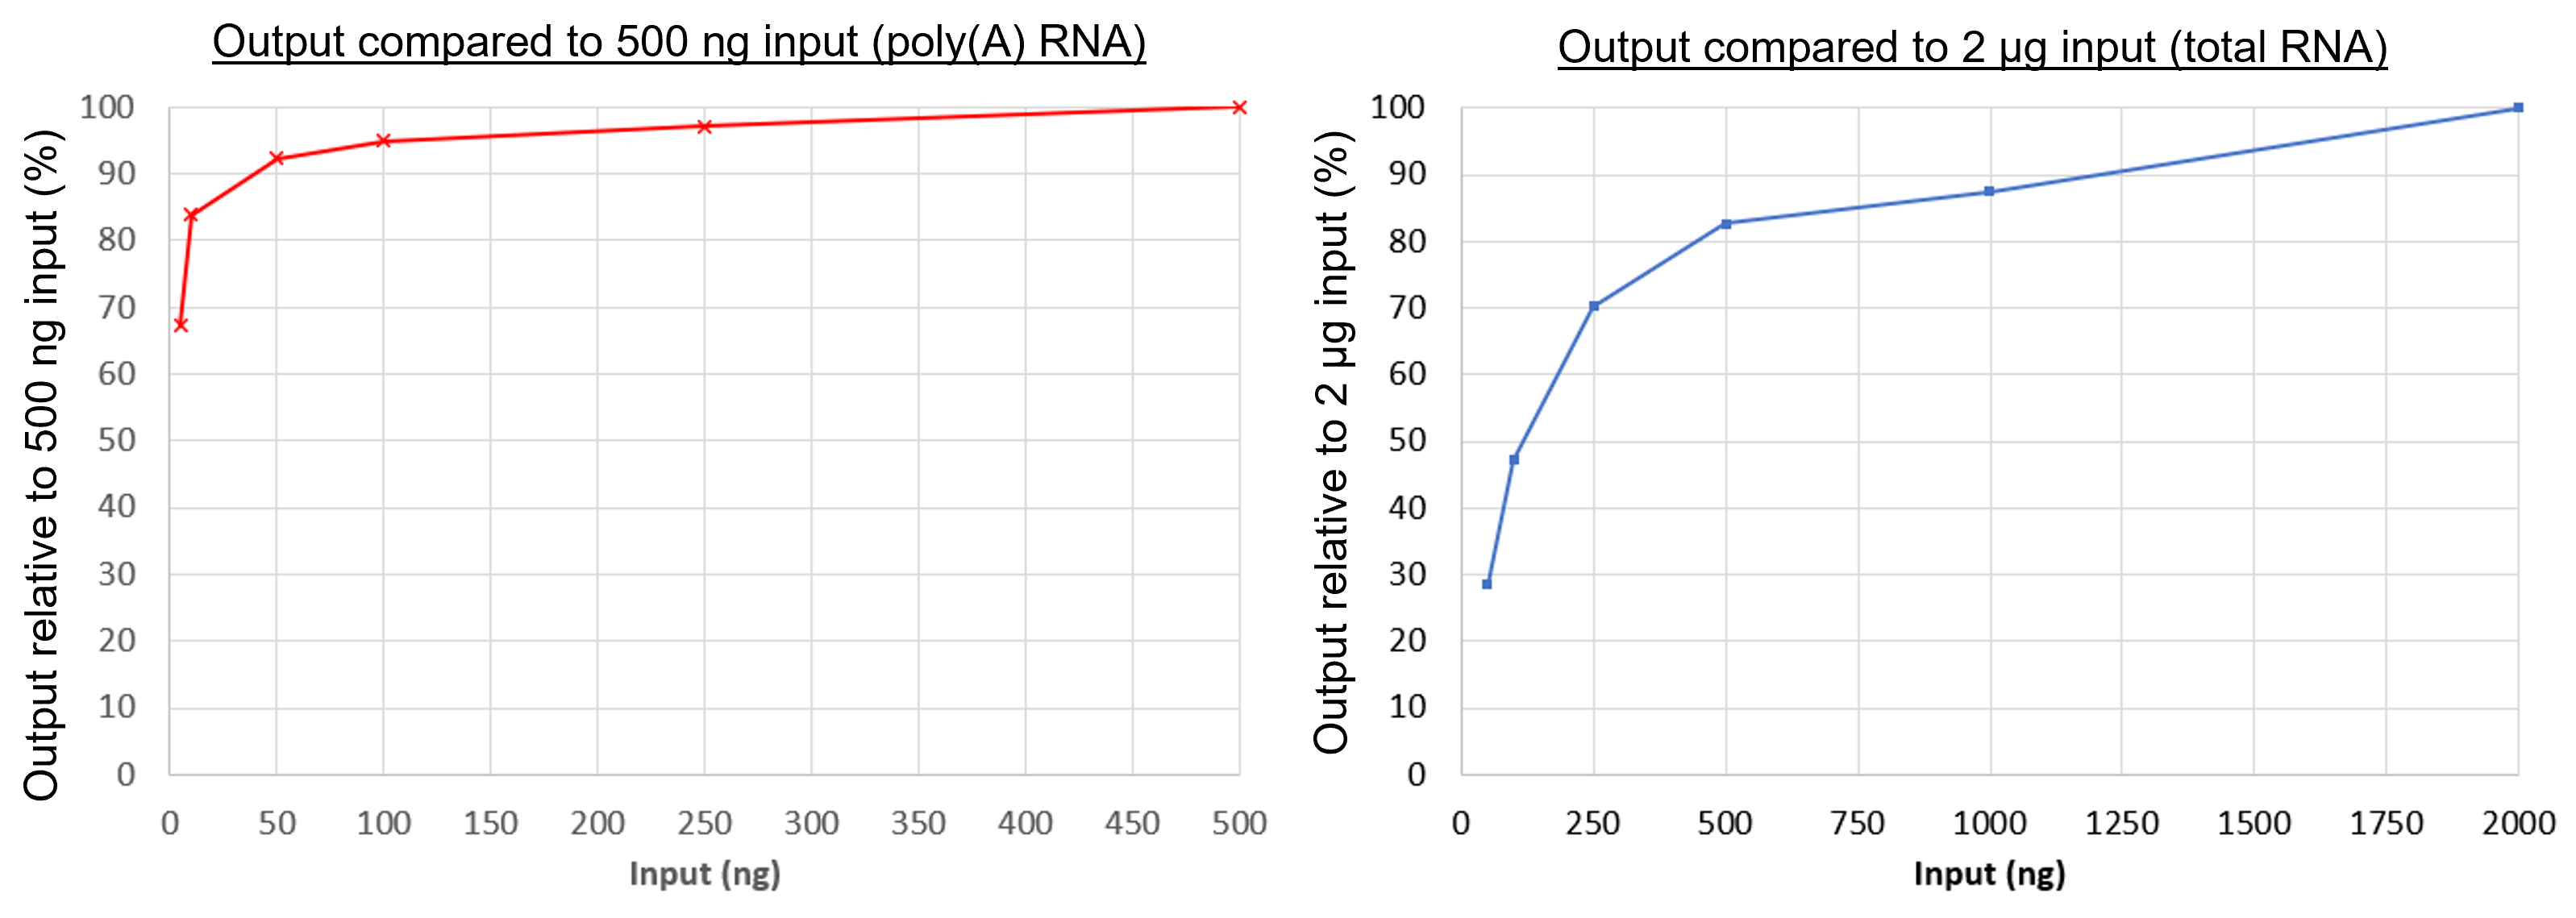 RNA002 input recommendations